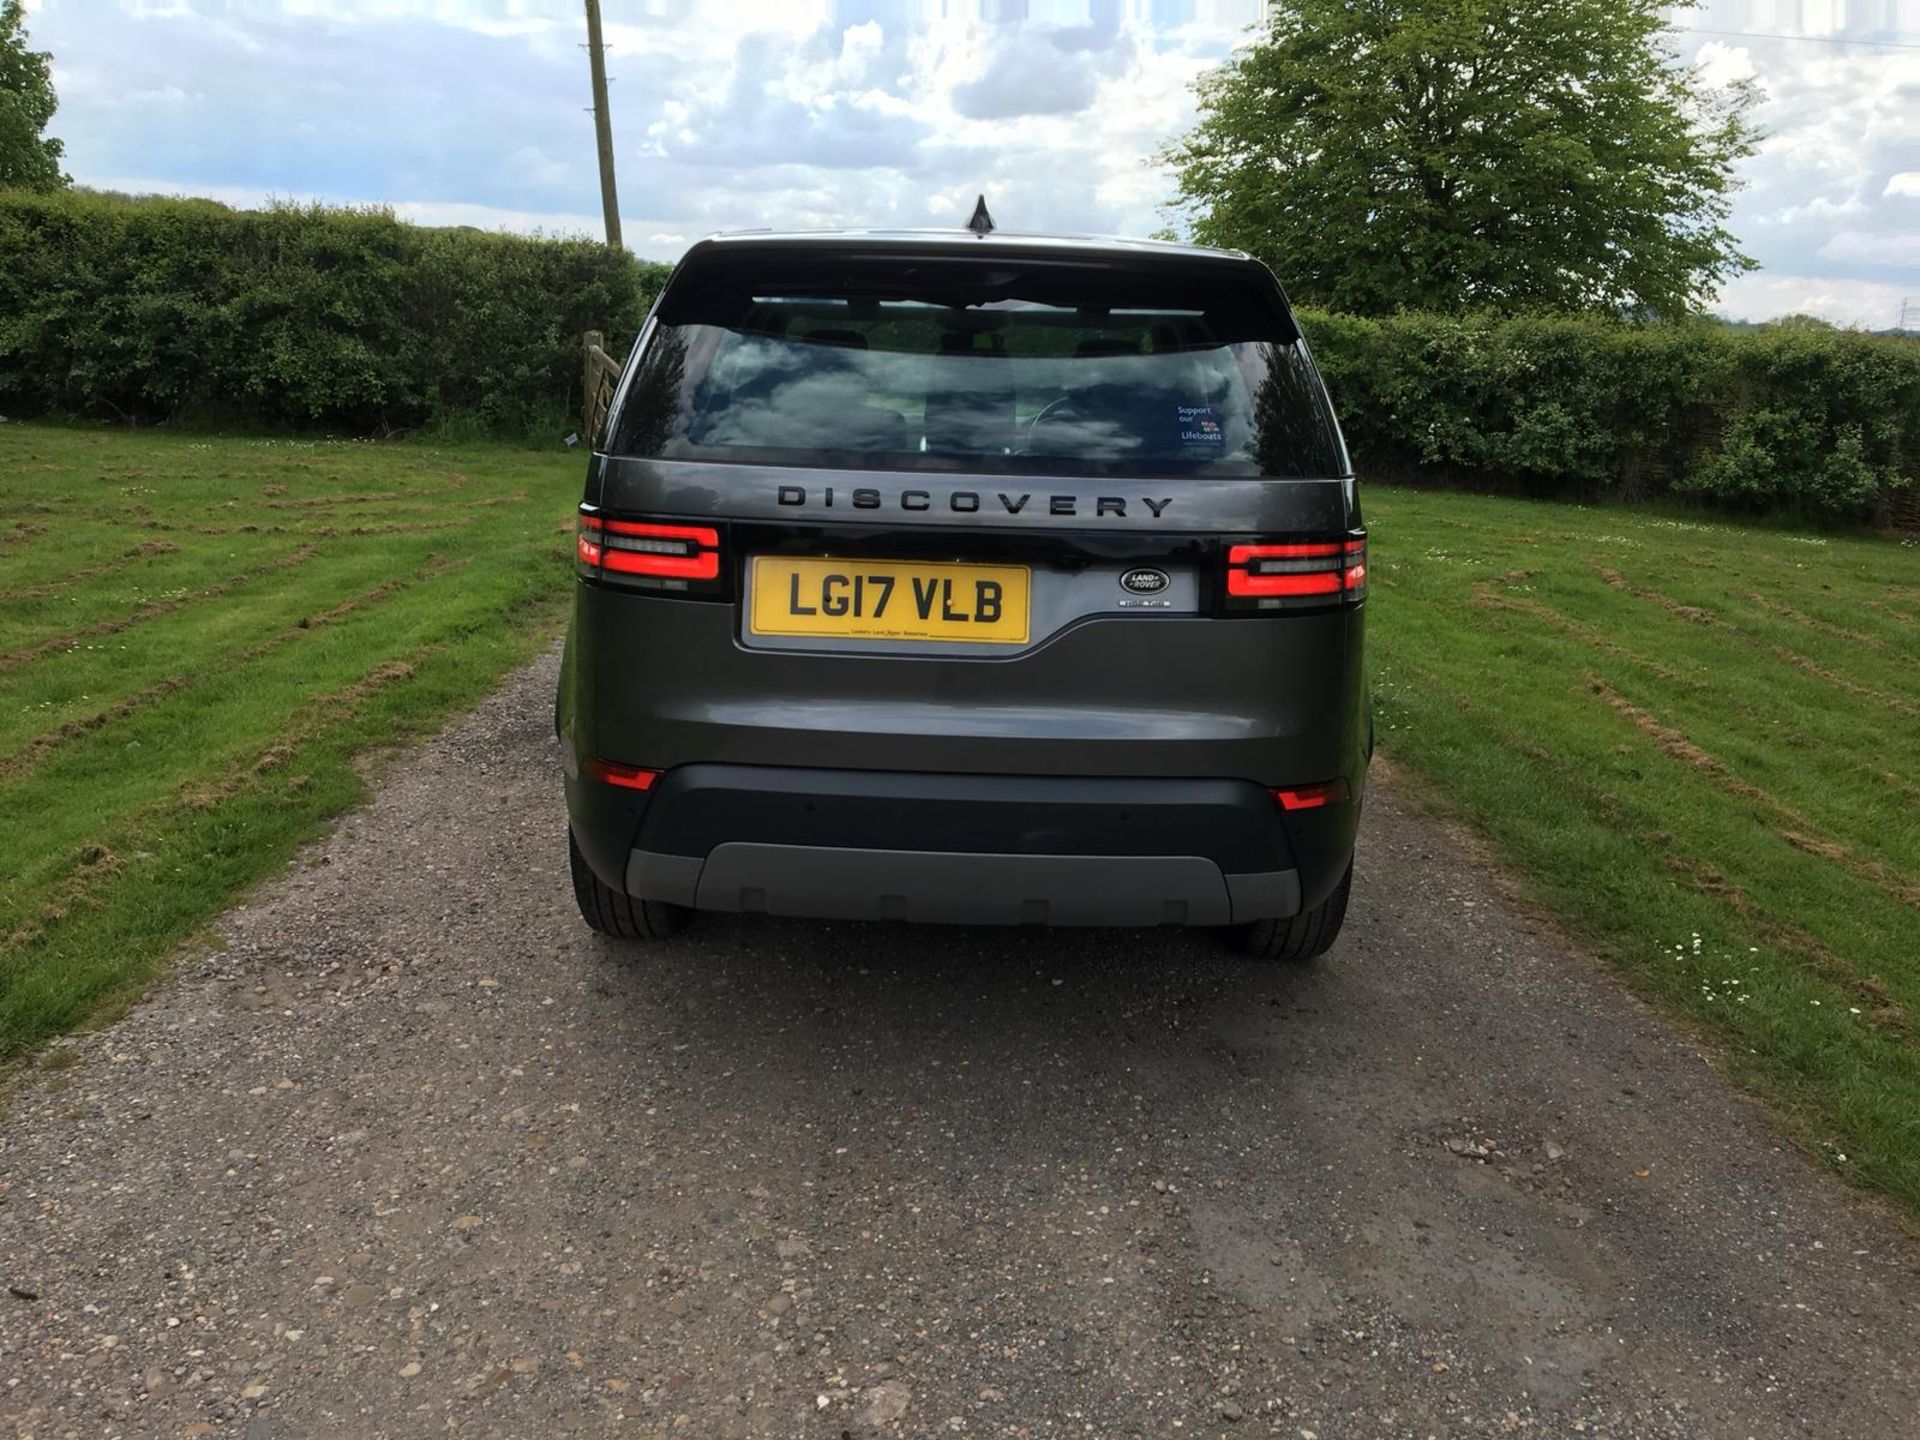 2017 REG LANDROVER DISCOVERY 5 TD6 HSE AUTO 2017 NEW SHAPE - Image 8 of 17